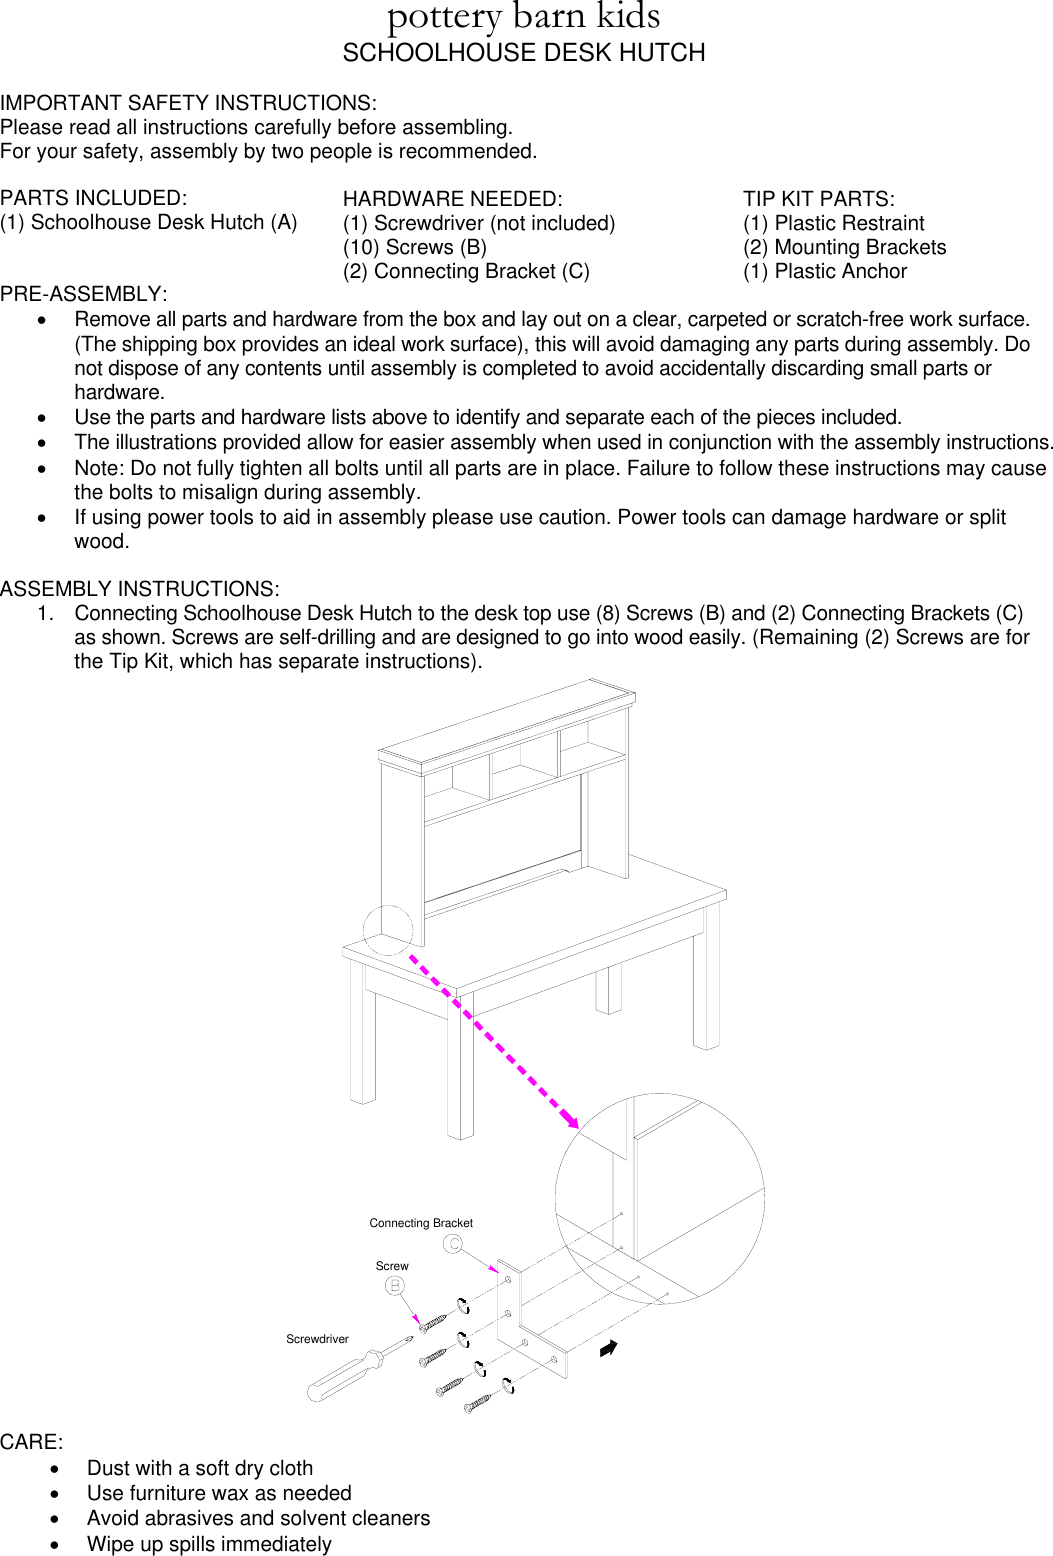 Pottery Barn Schoolhouse Desk Hutch 115kb These Instructions Are Provided For Your Safety